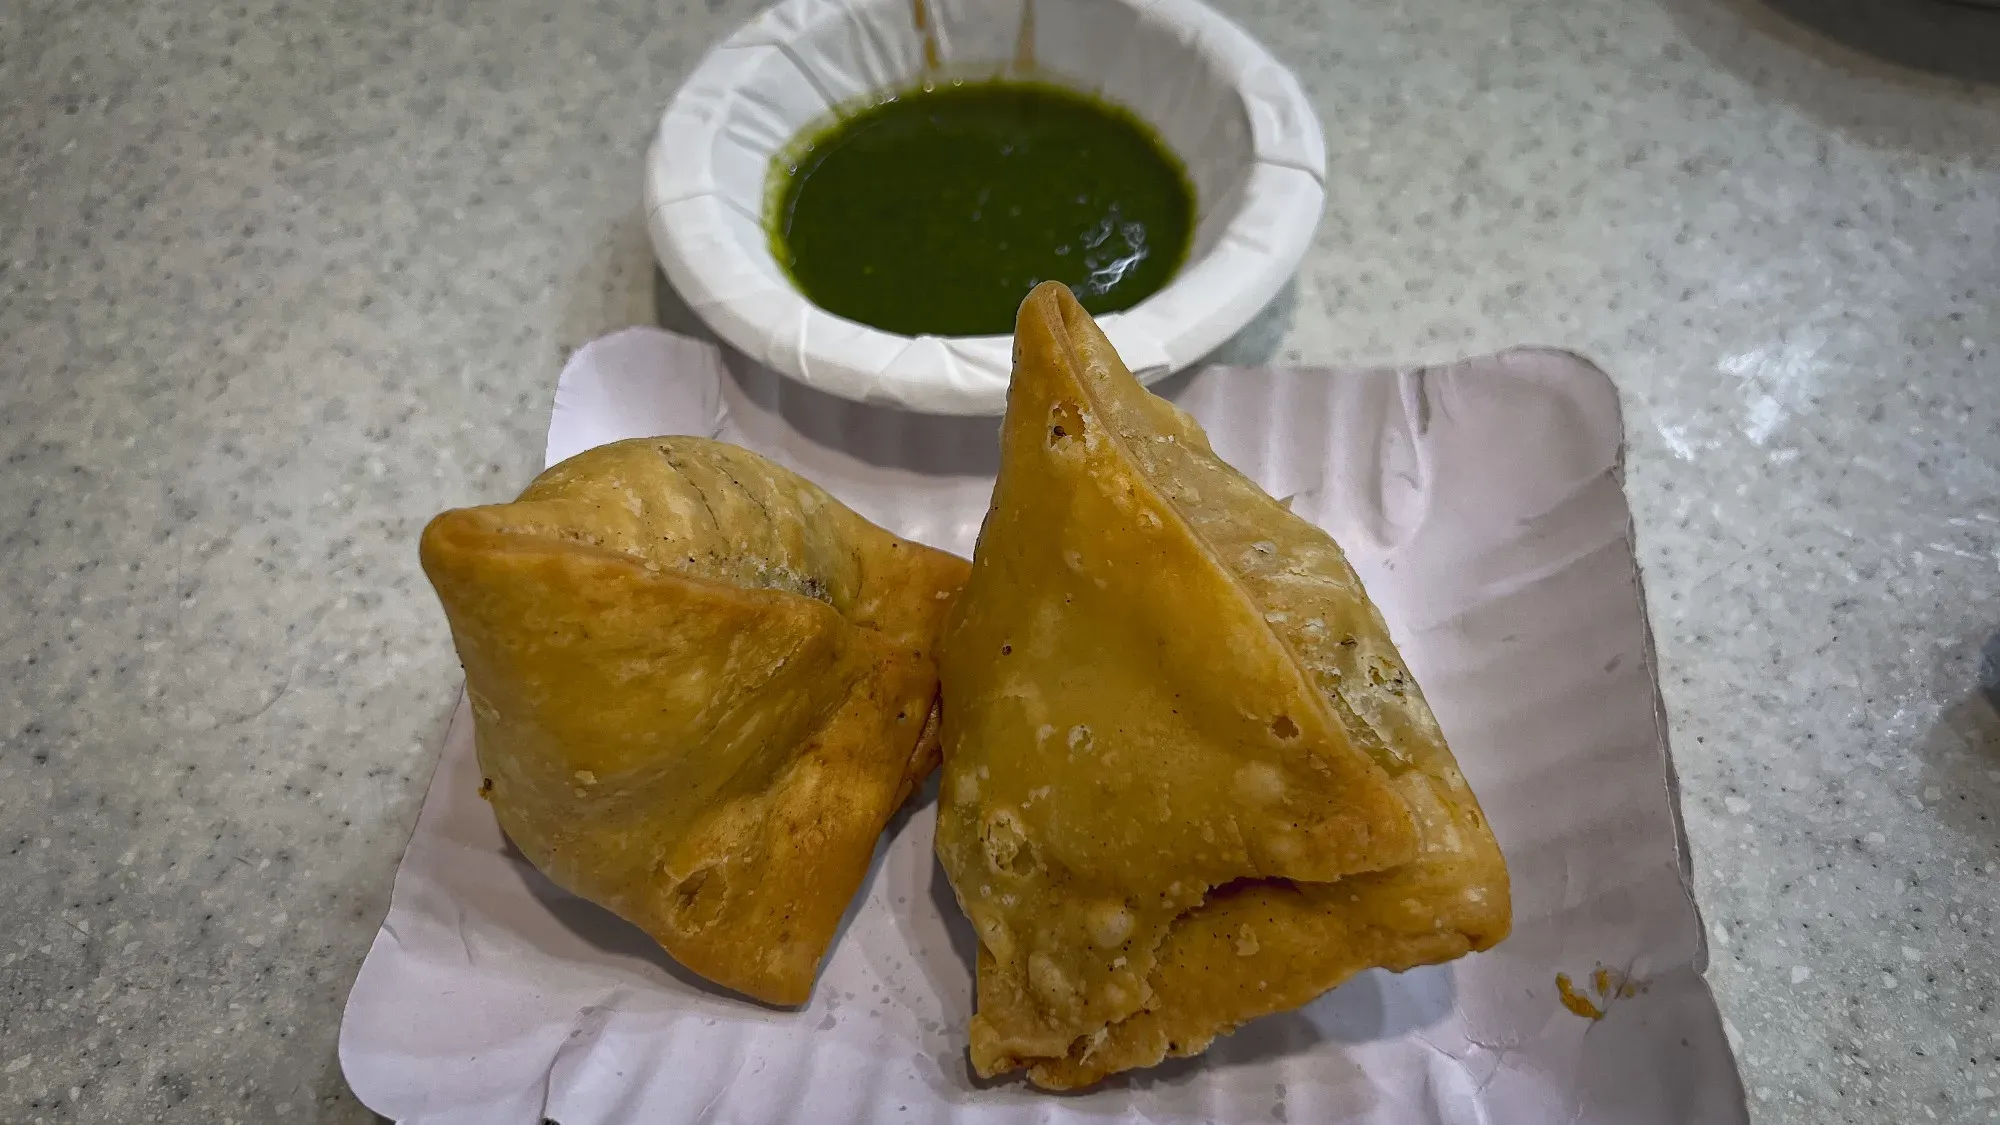 Two Samosa with a chutney dip in the background, angled shot.